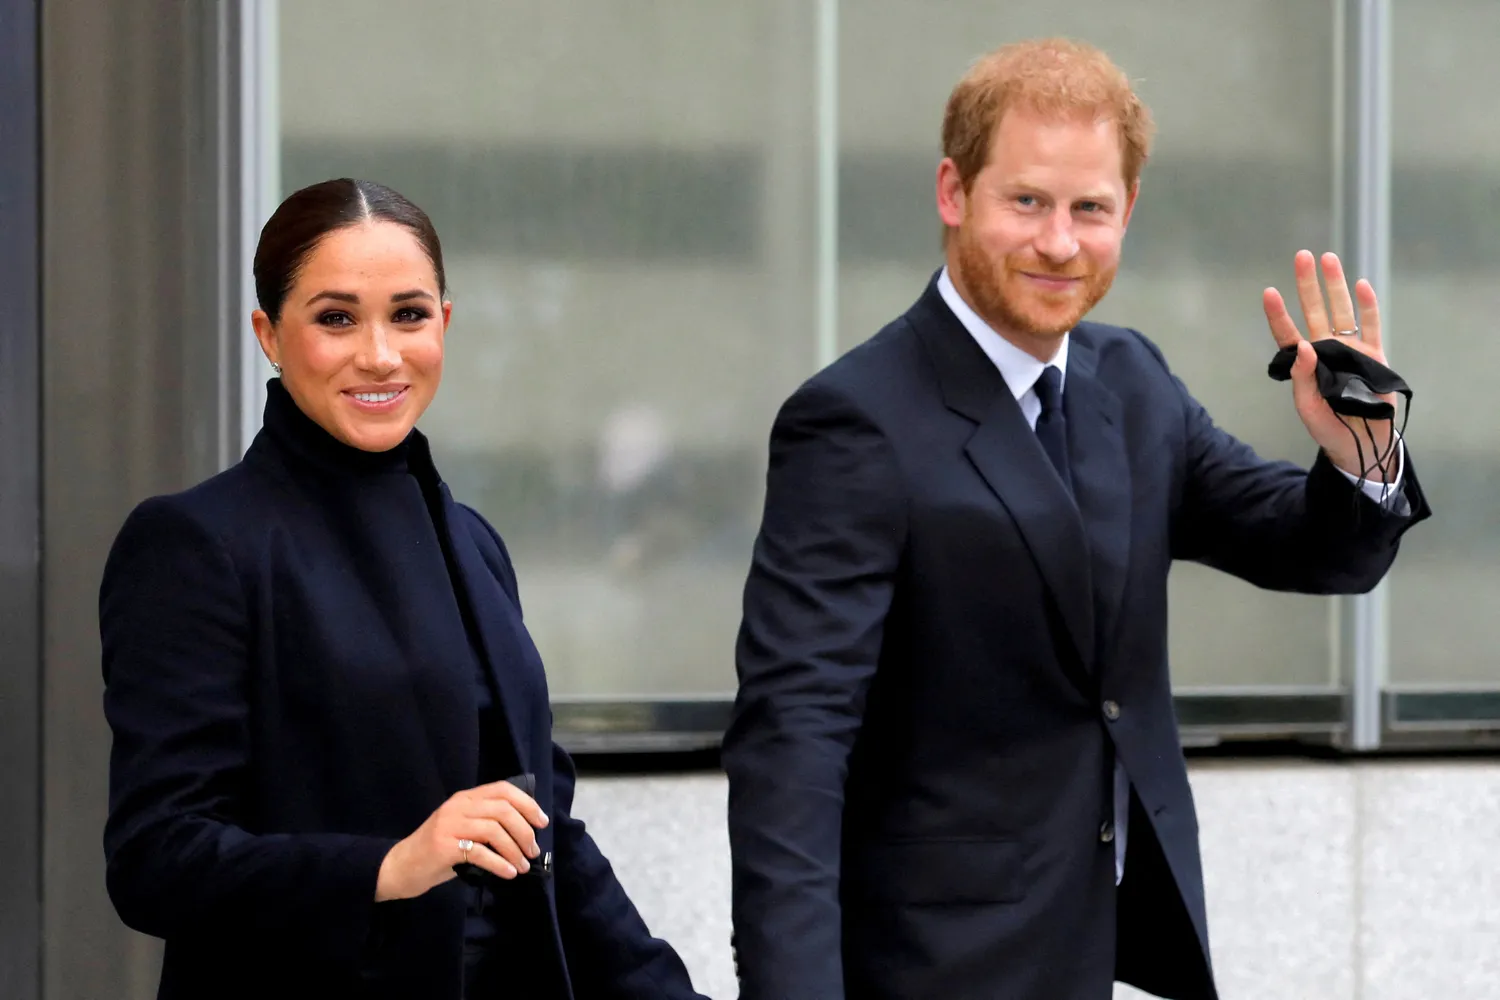 Prince Harry With his wife Meghan Markle against The publishers